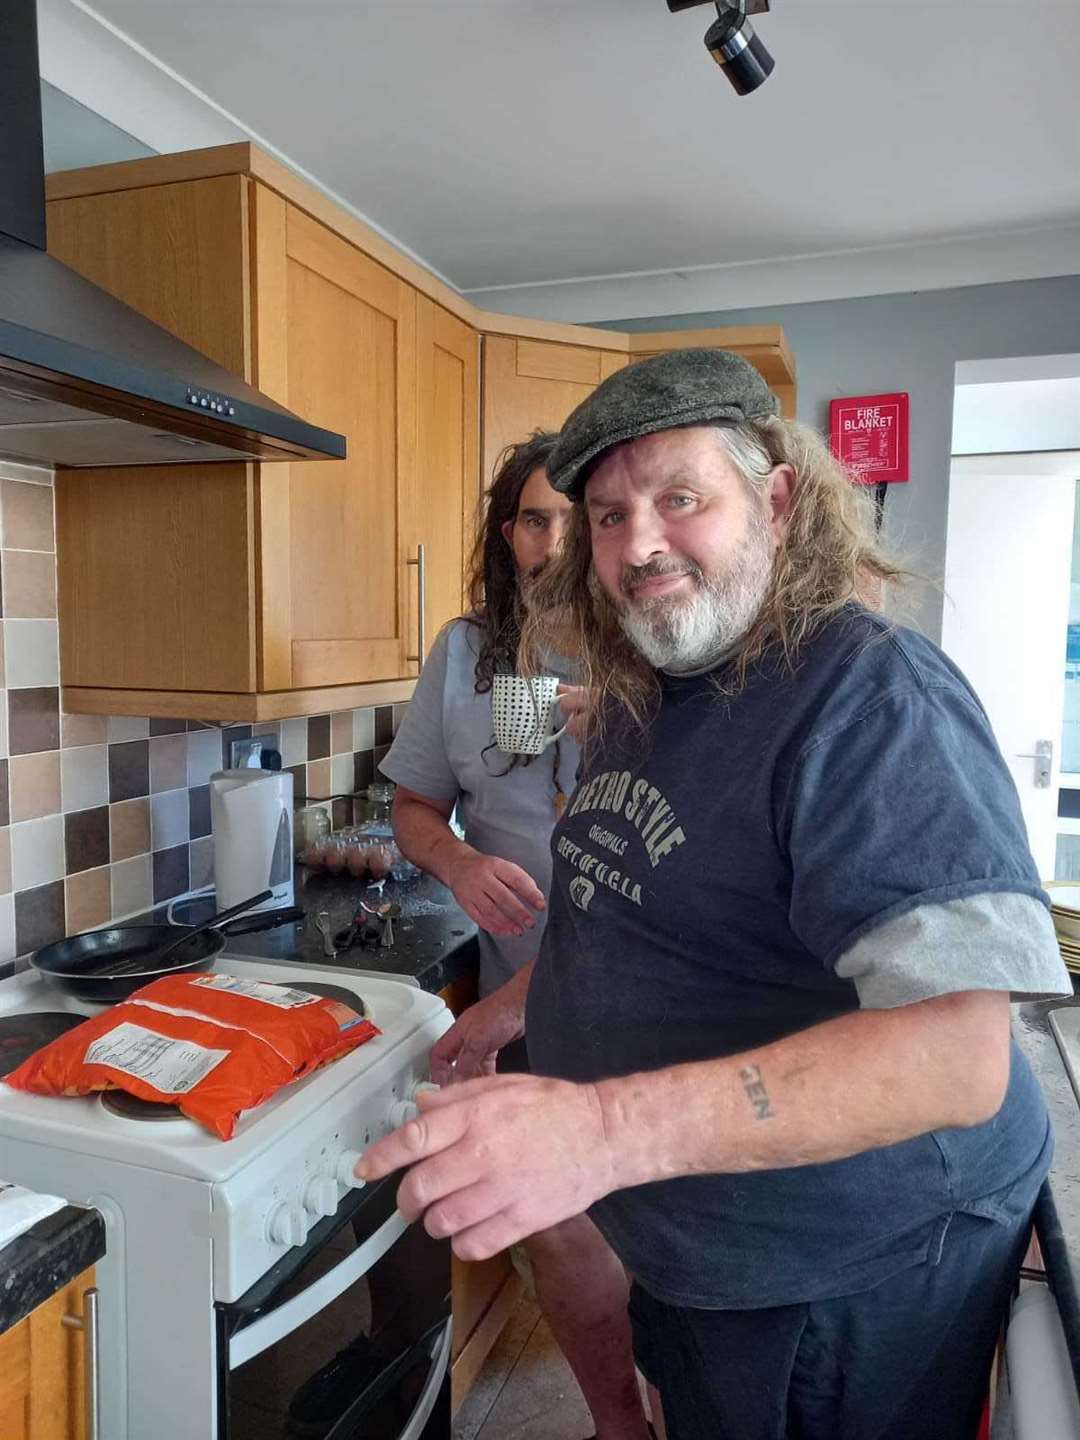 Brothers Darren and Benito Abela have found a new life after a government grant helped Swale council and Riverside housing association find them a home to share in Sittingbourne